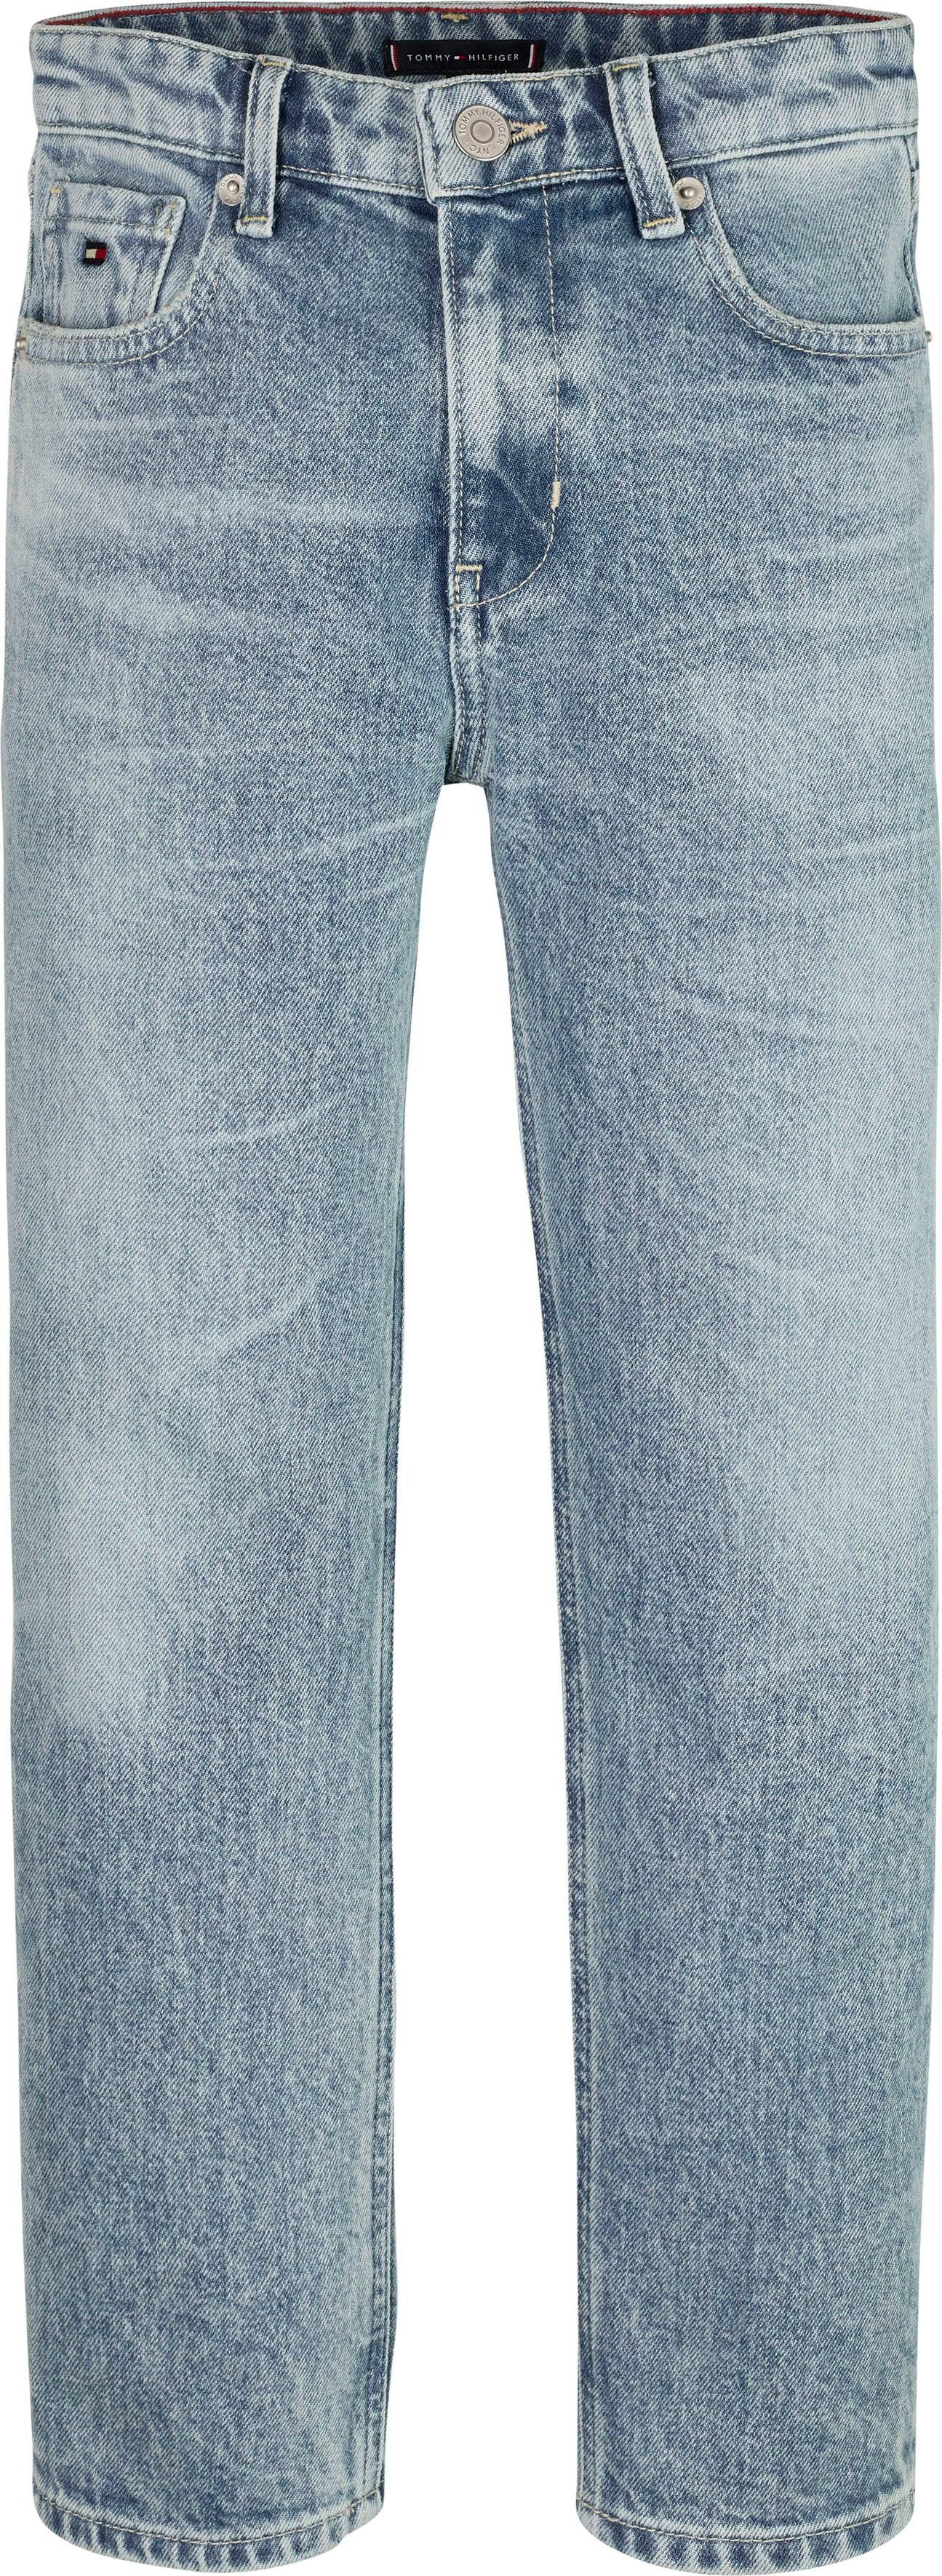 JEAN Hilfiger Jeans 5-Pocket-Style Bequeme im Tommy SKATER RECYCLED